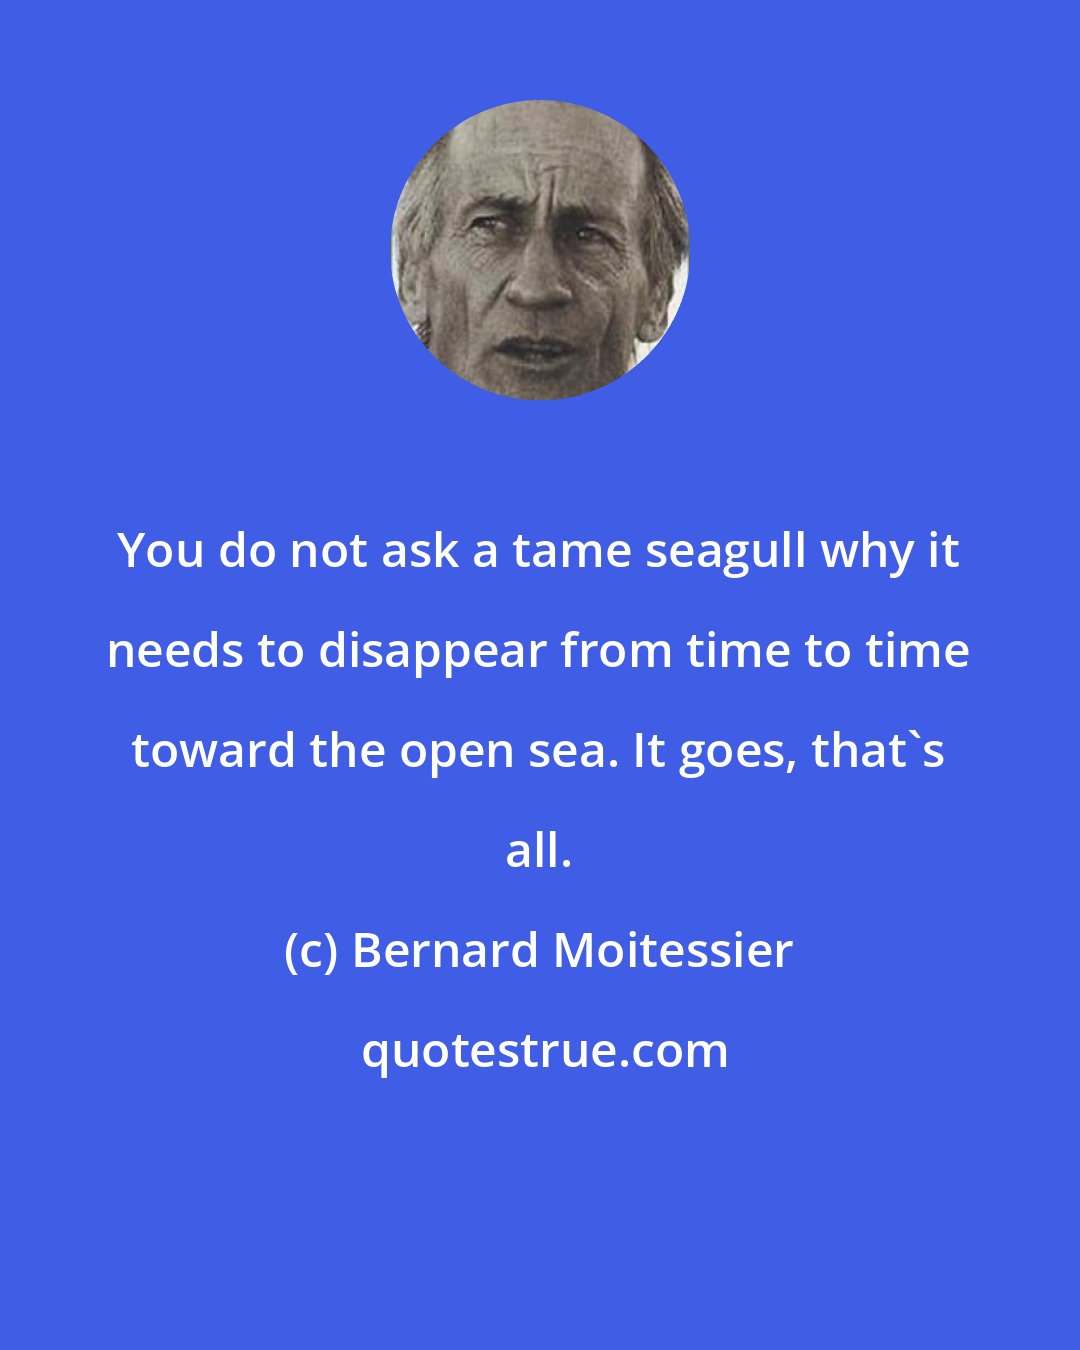 Bernard Moitessier: You do not ask a tame seagull why it needs to disappear from time to time toward the open sea. It goes, that's all.